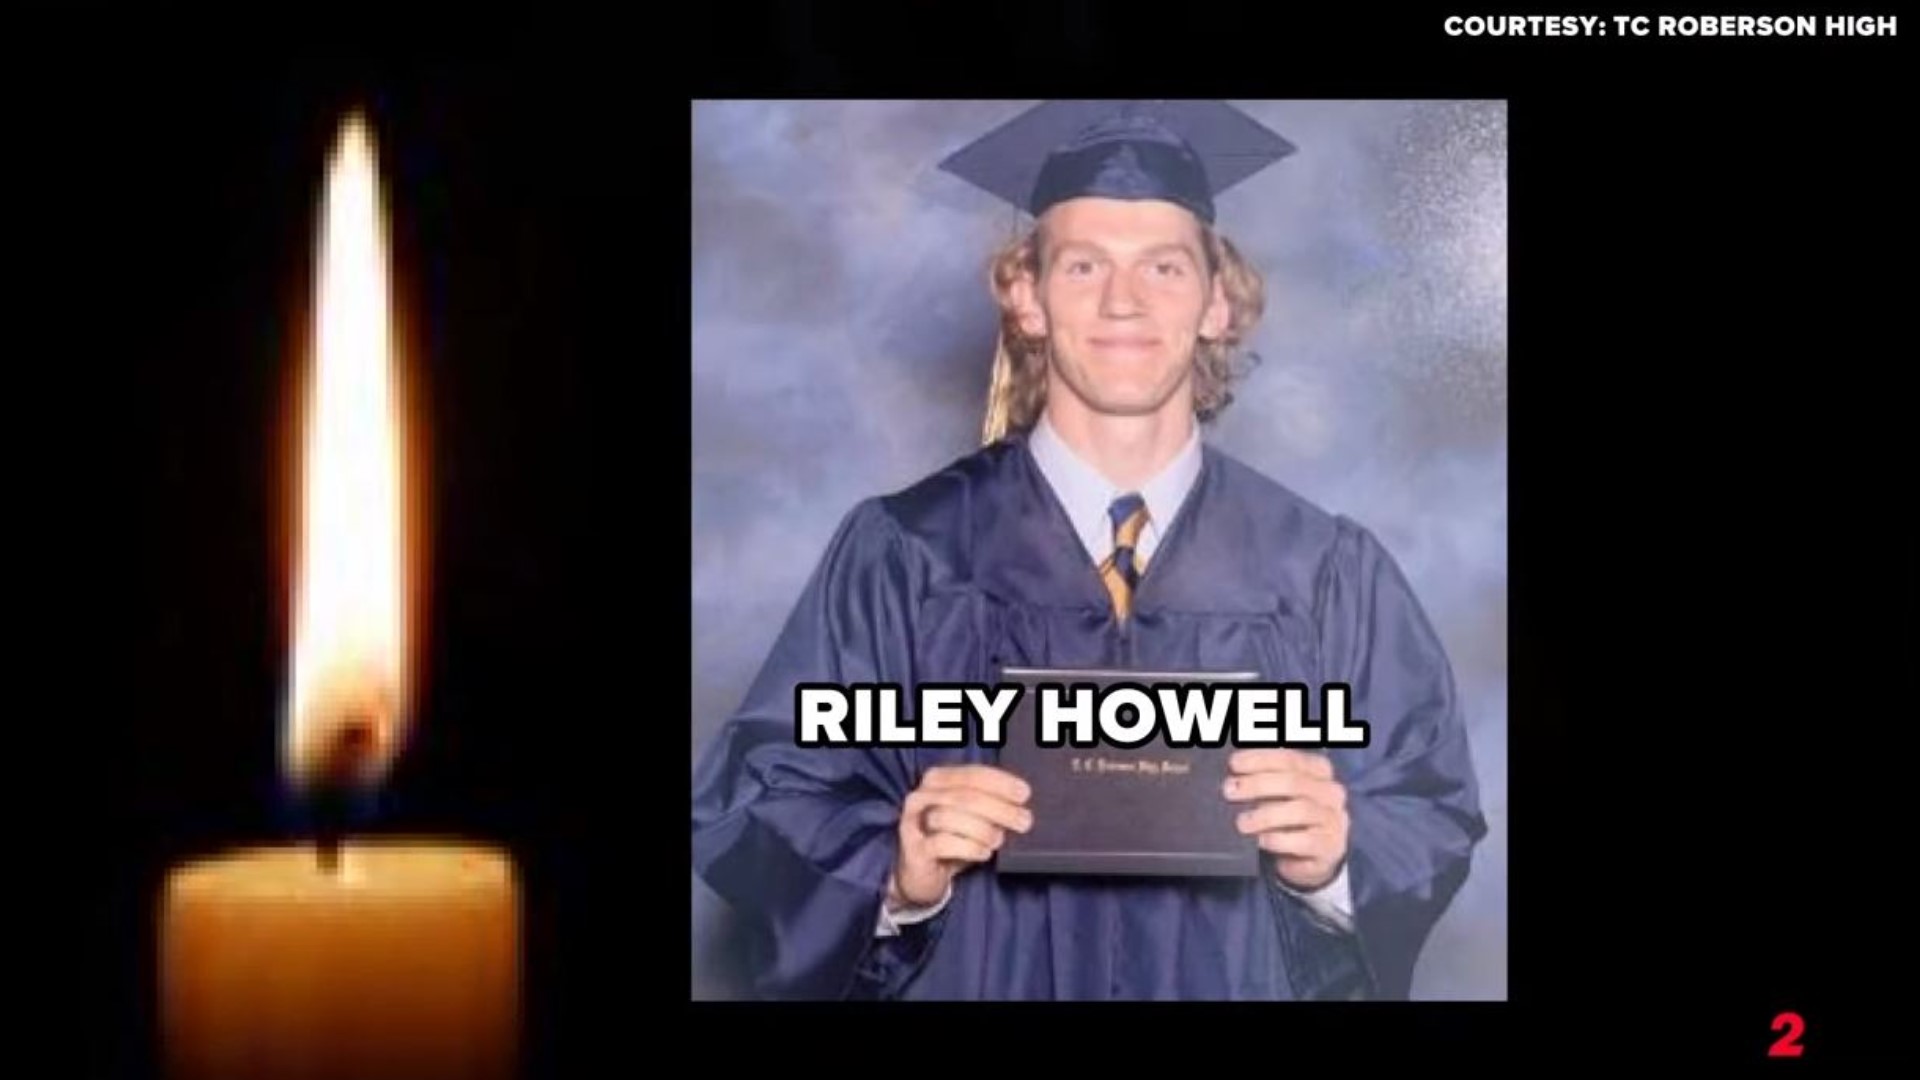 Charlotte Police Chief says Riley Howell’s actions saved lives and the UNC-Charlotte student is a true hero.